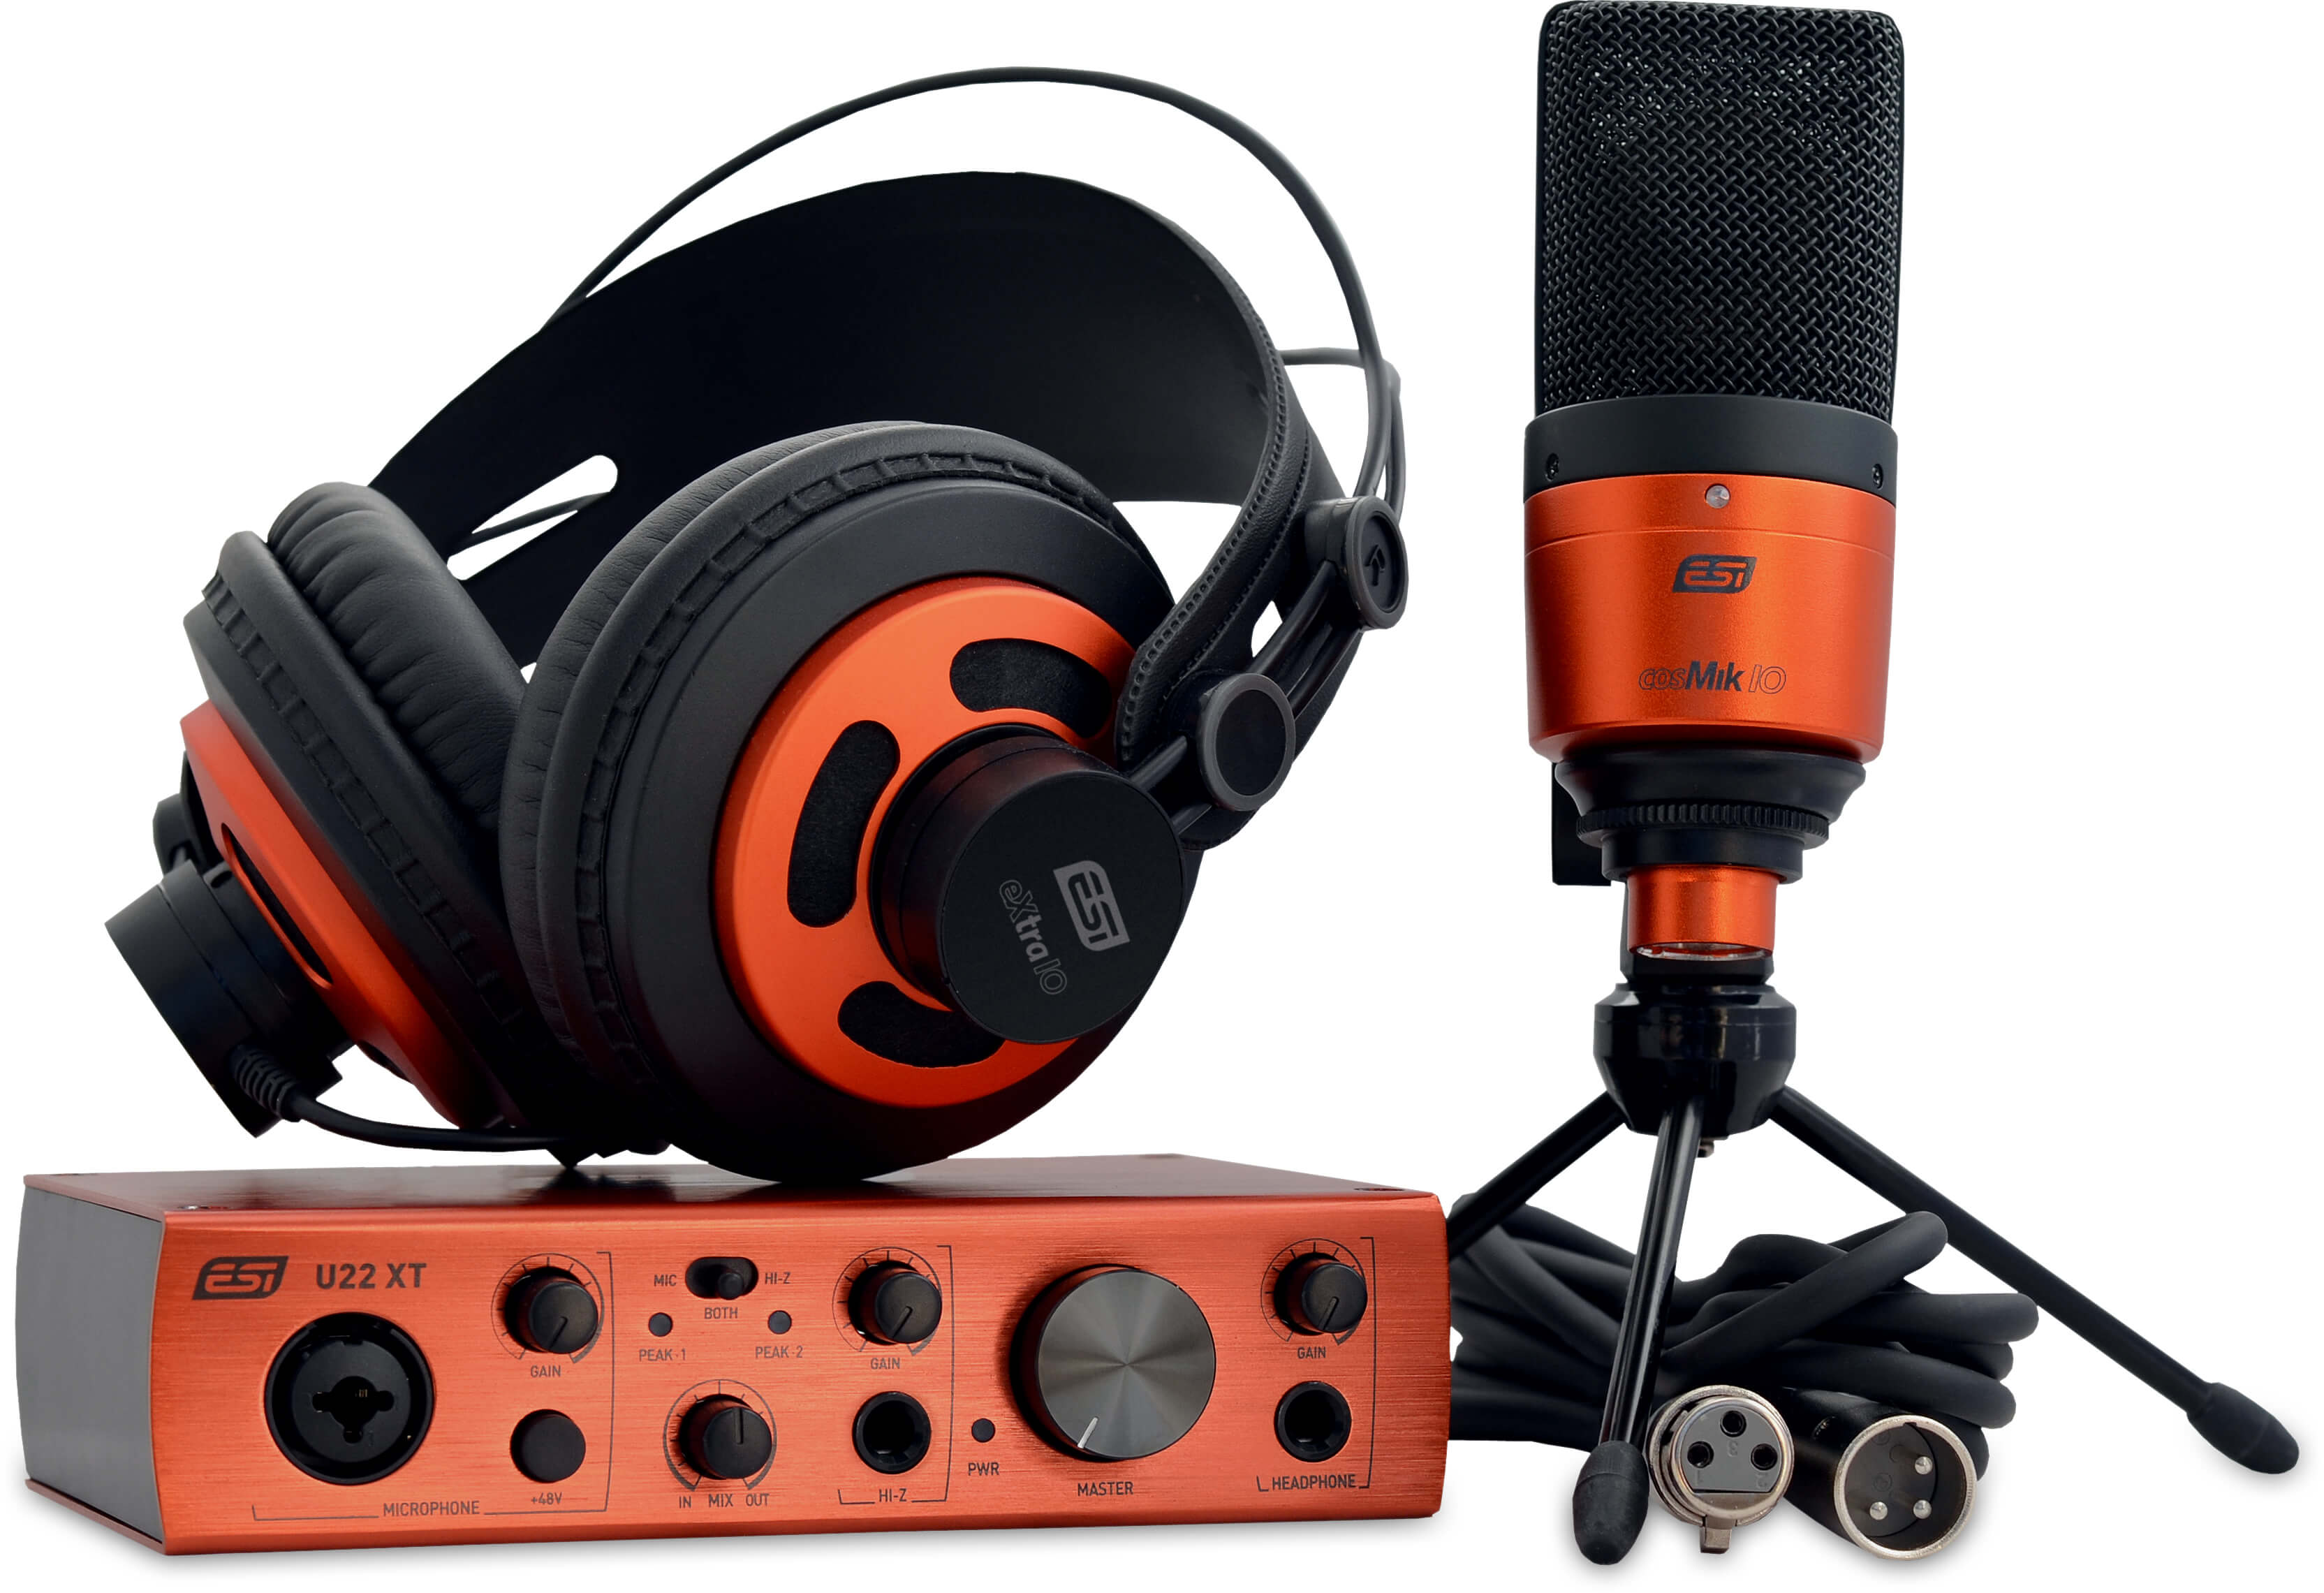 ESI's new U22 XT cosMik Set home recording solution is available mid May